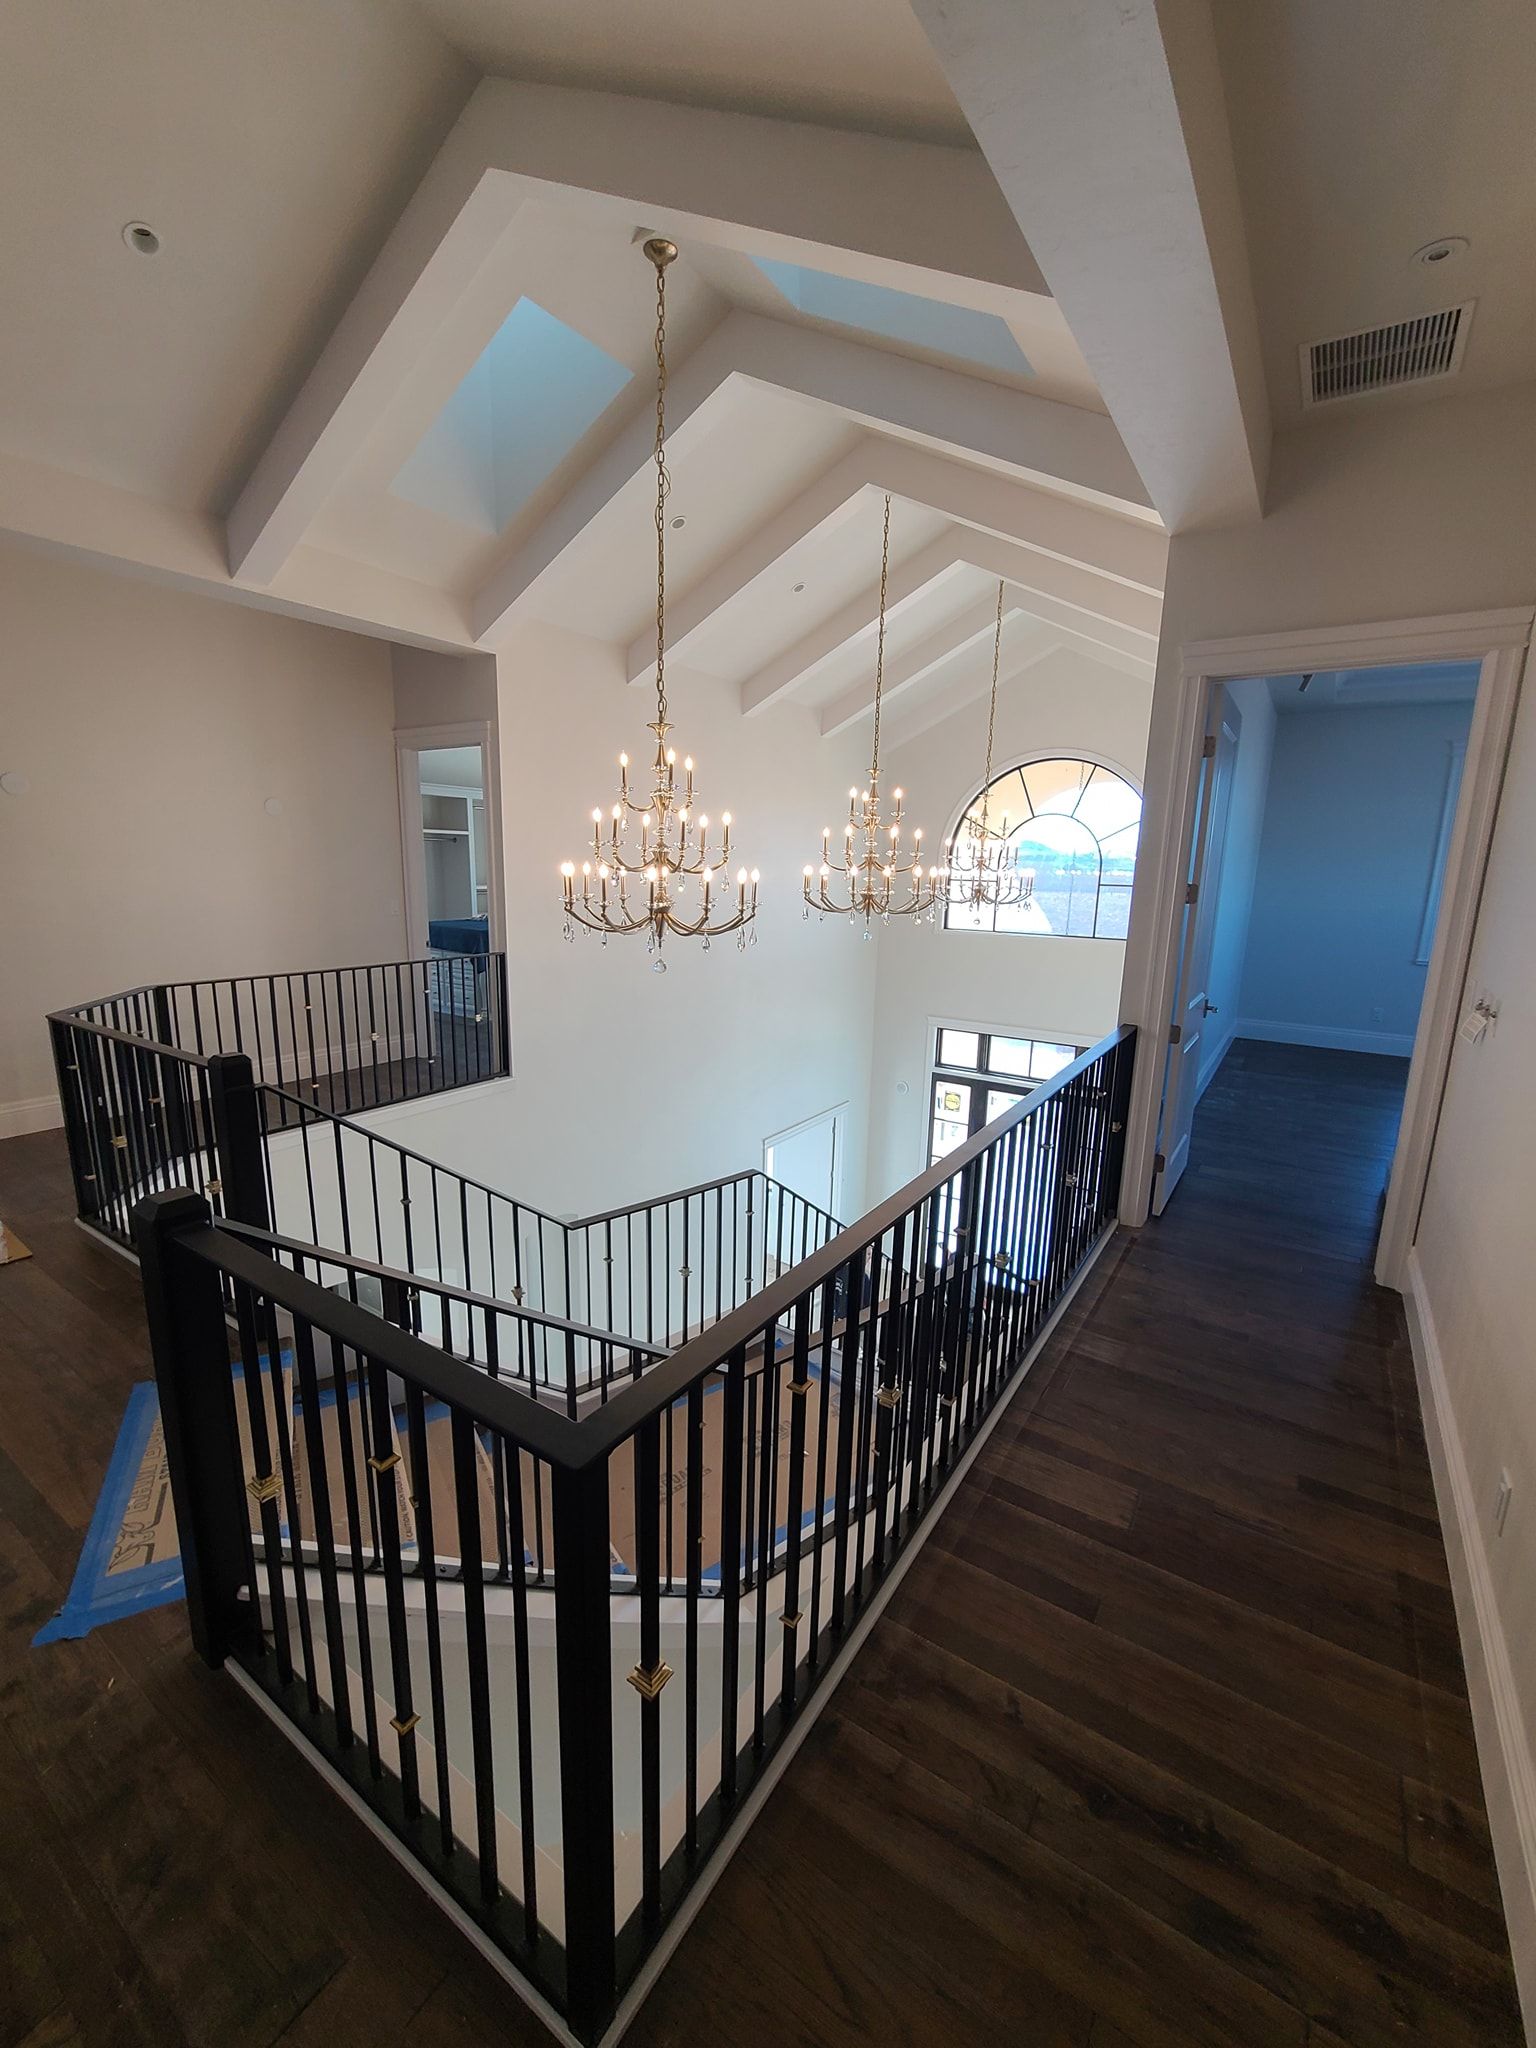 Our Interior Painting service is a quick, easy, and affordable way to update the look of your home. We can paint any room in your home, including ceilings and trim. We use high-quality paints that will last for years. for Hoffmann's Custom Painting in Grand Junction, CO